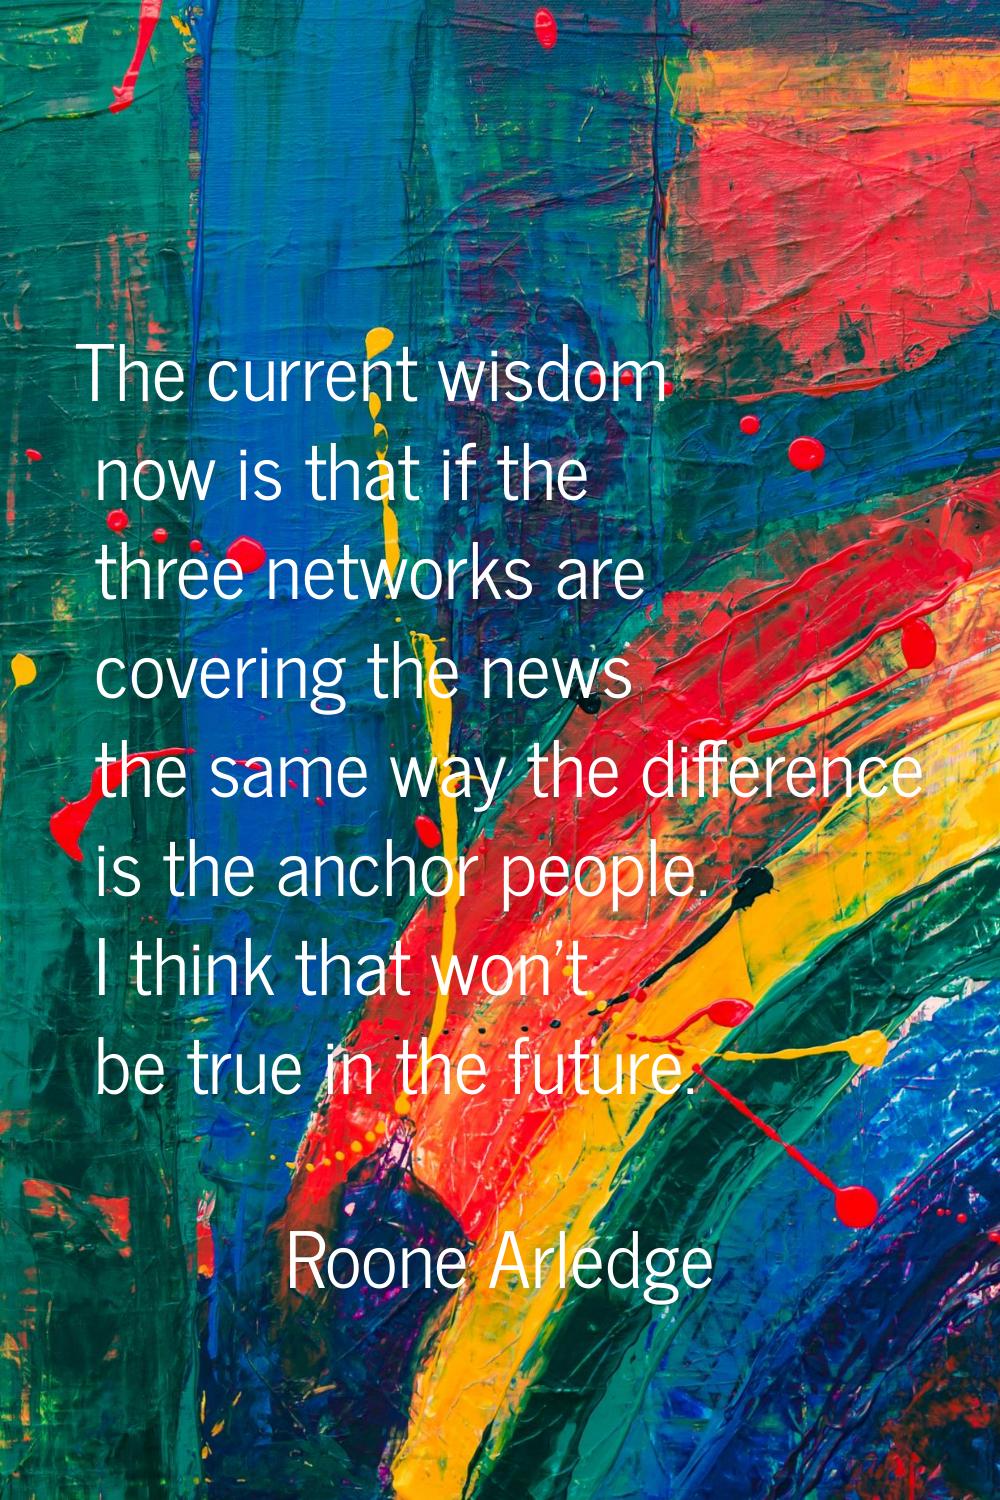 The current wisdom now is that if the three networks are covering the news the same way the differe